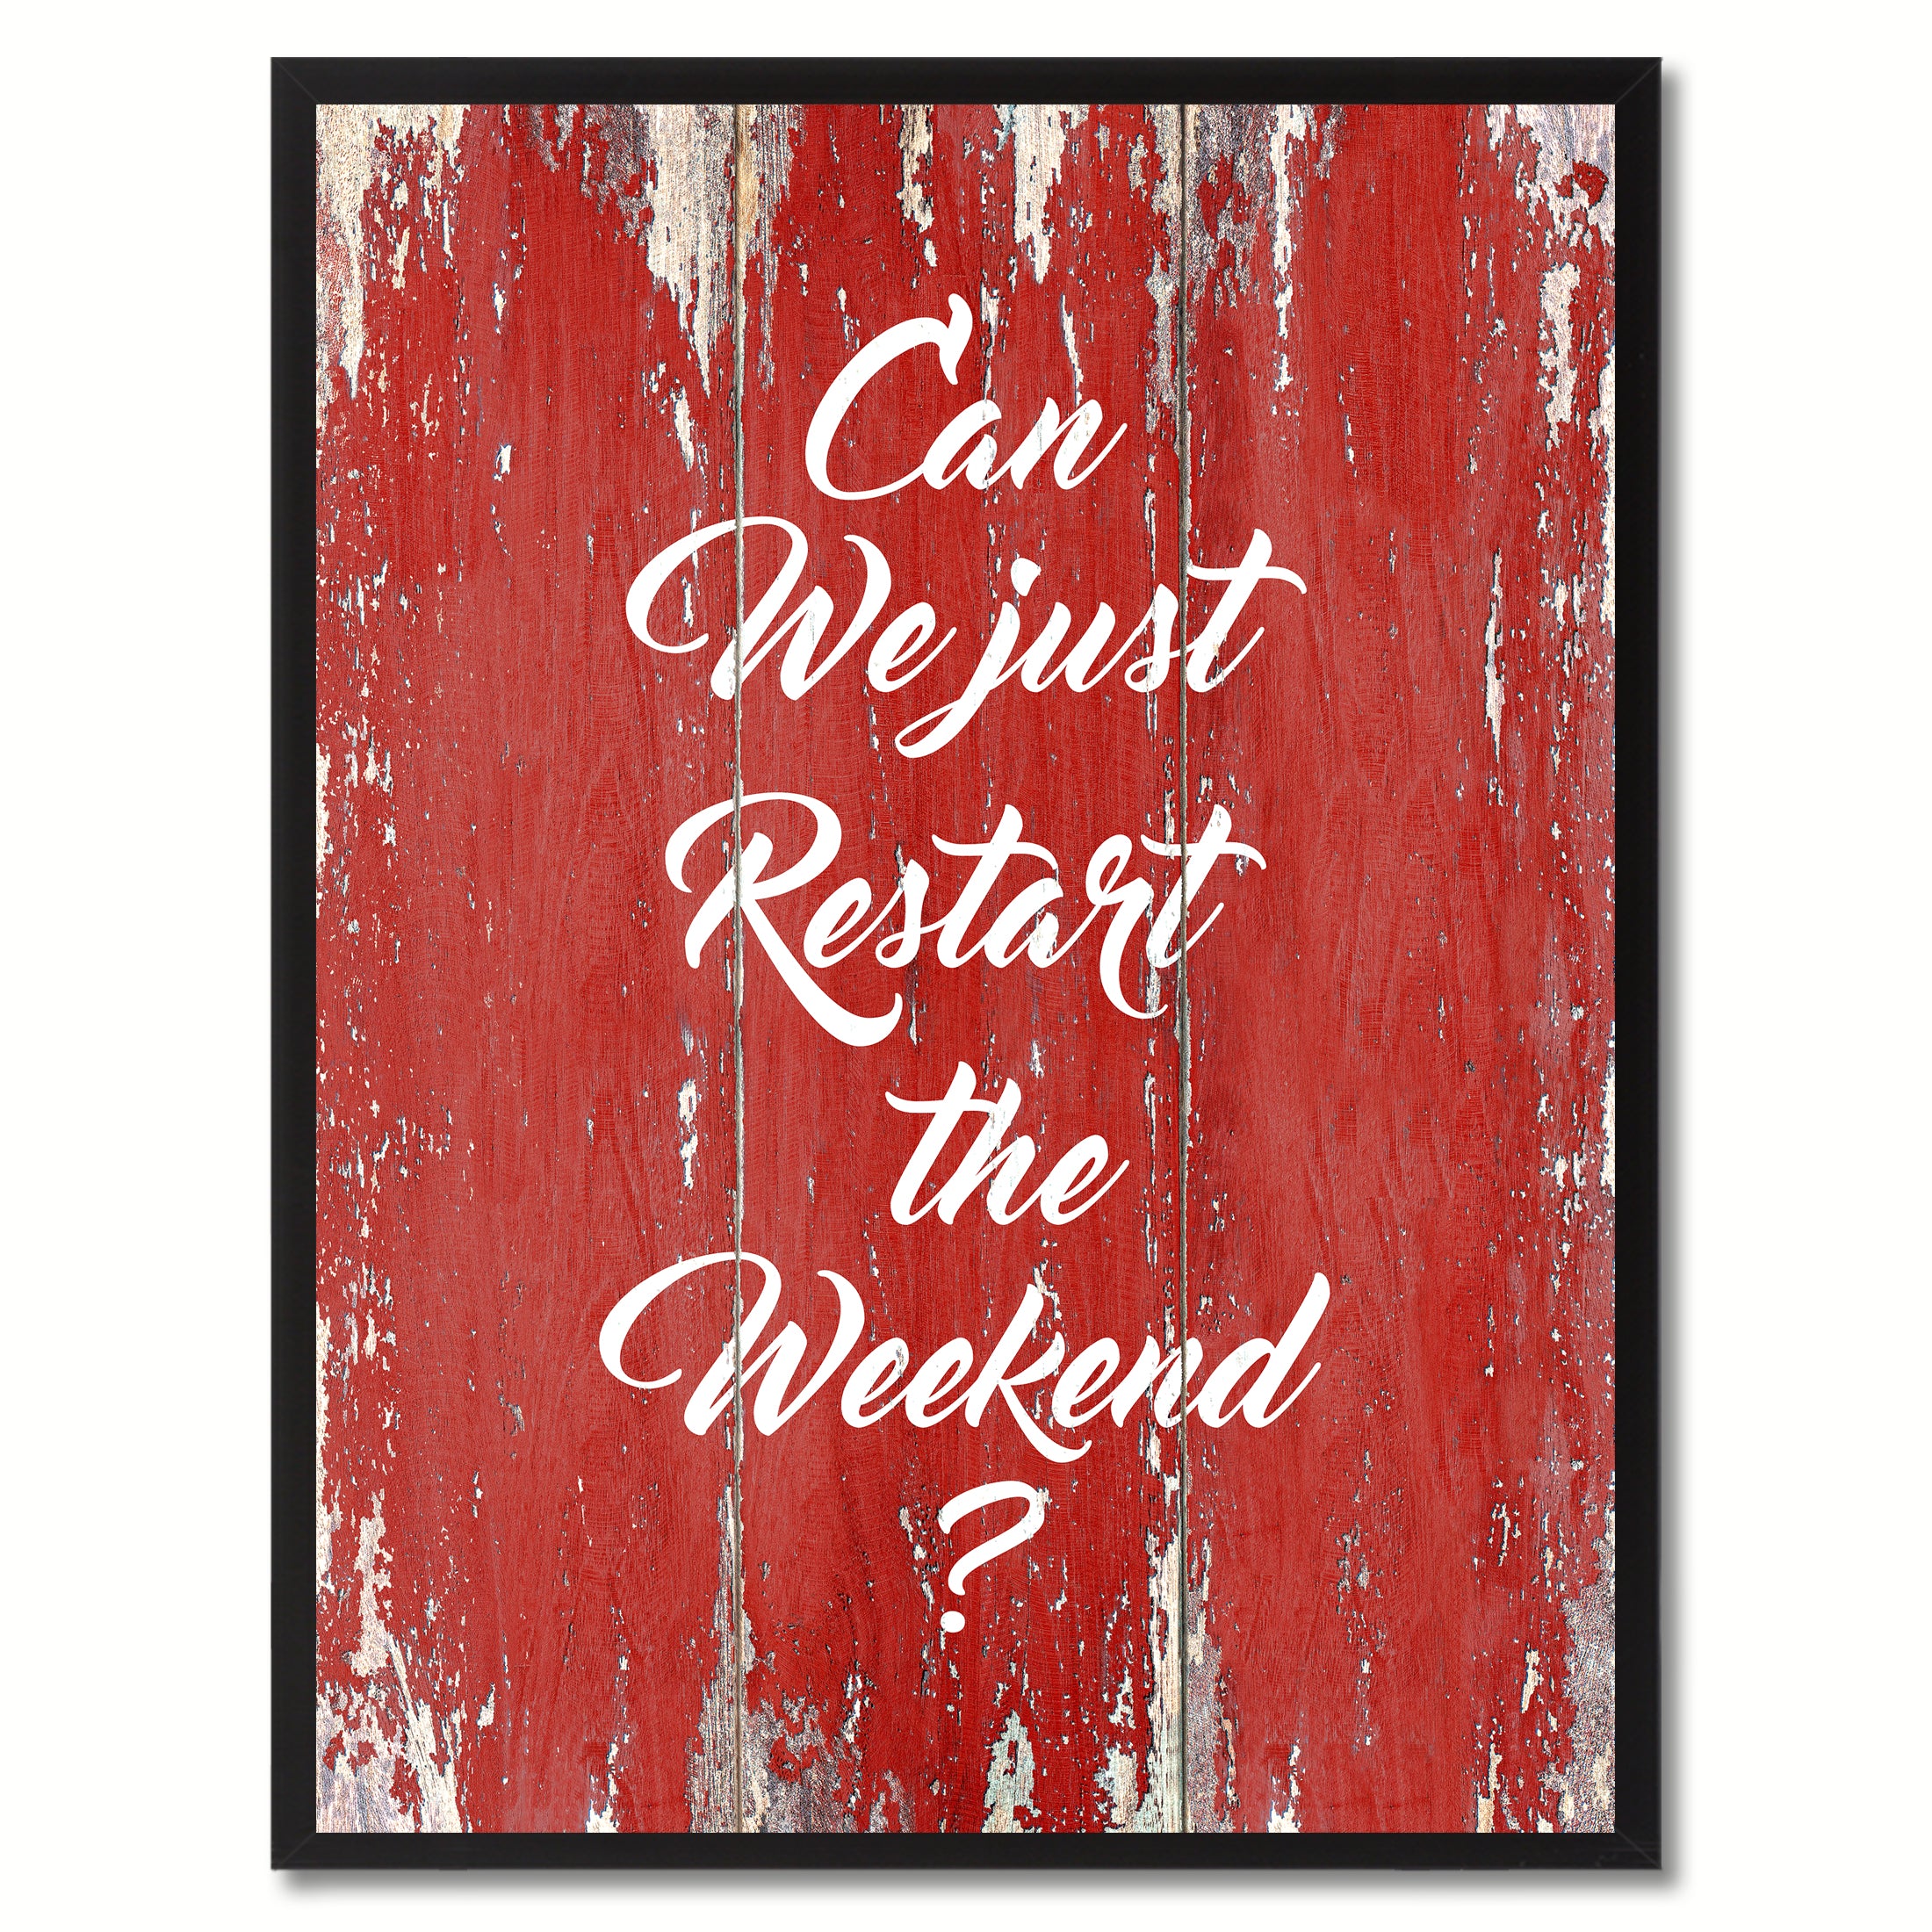 Can We Just Restart The Weekend Saying Black Framed Canvas Print Home Decor Wall Art Gifts 120310 Red